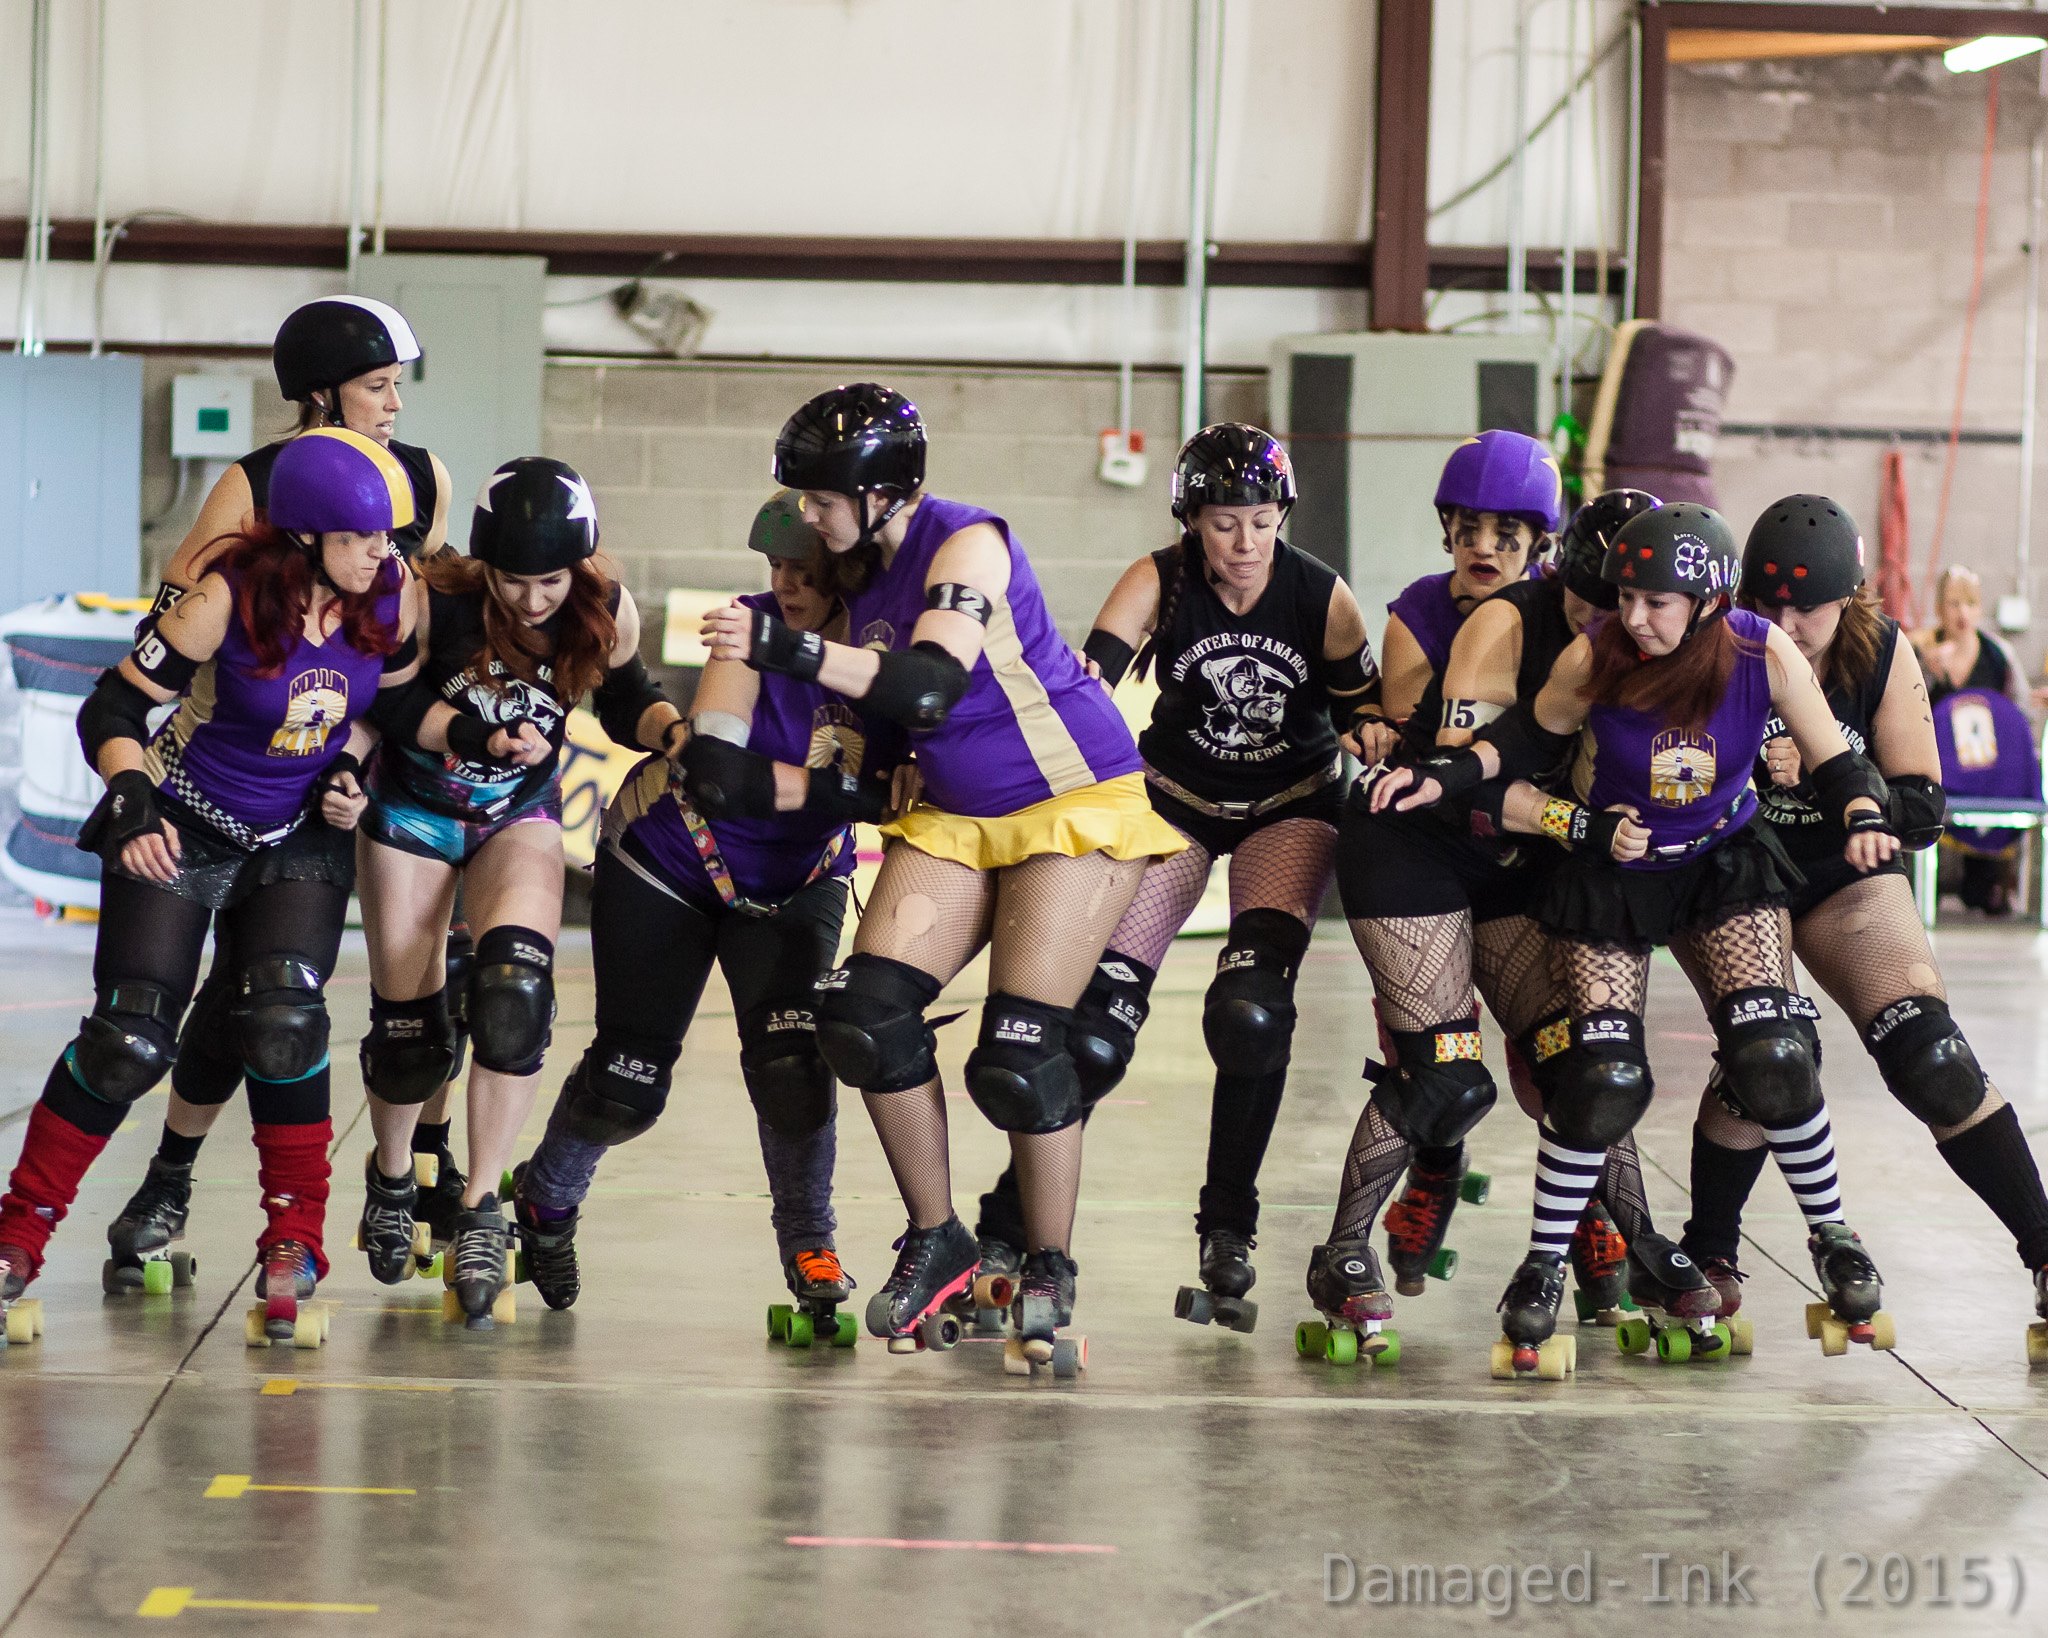 Rollin Rebellion vs Daughters of Anarchy 04.11. Photo Courtesy of Damaged-Ink